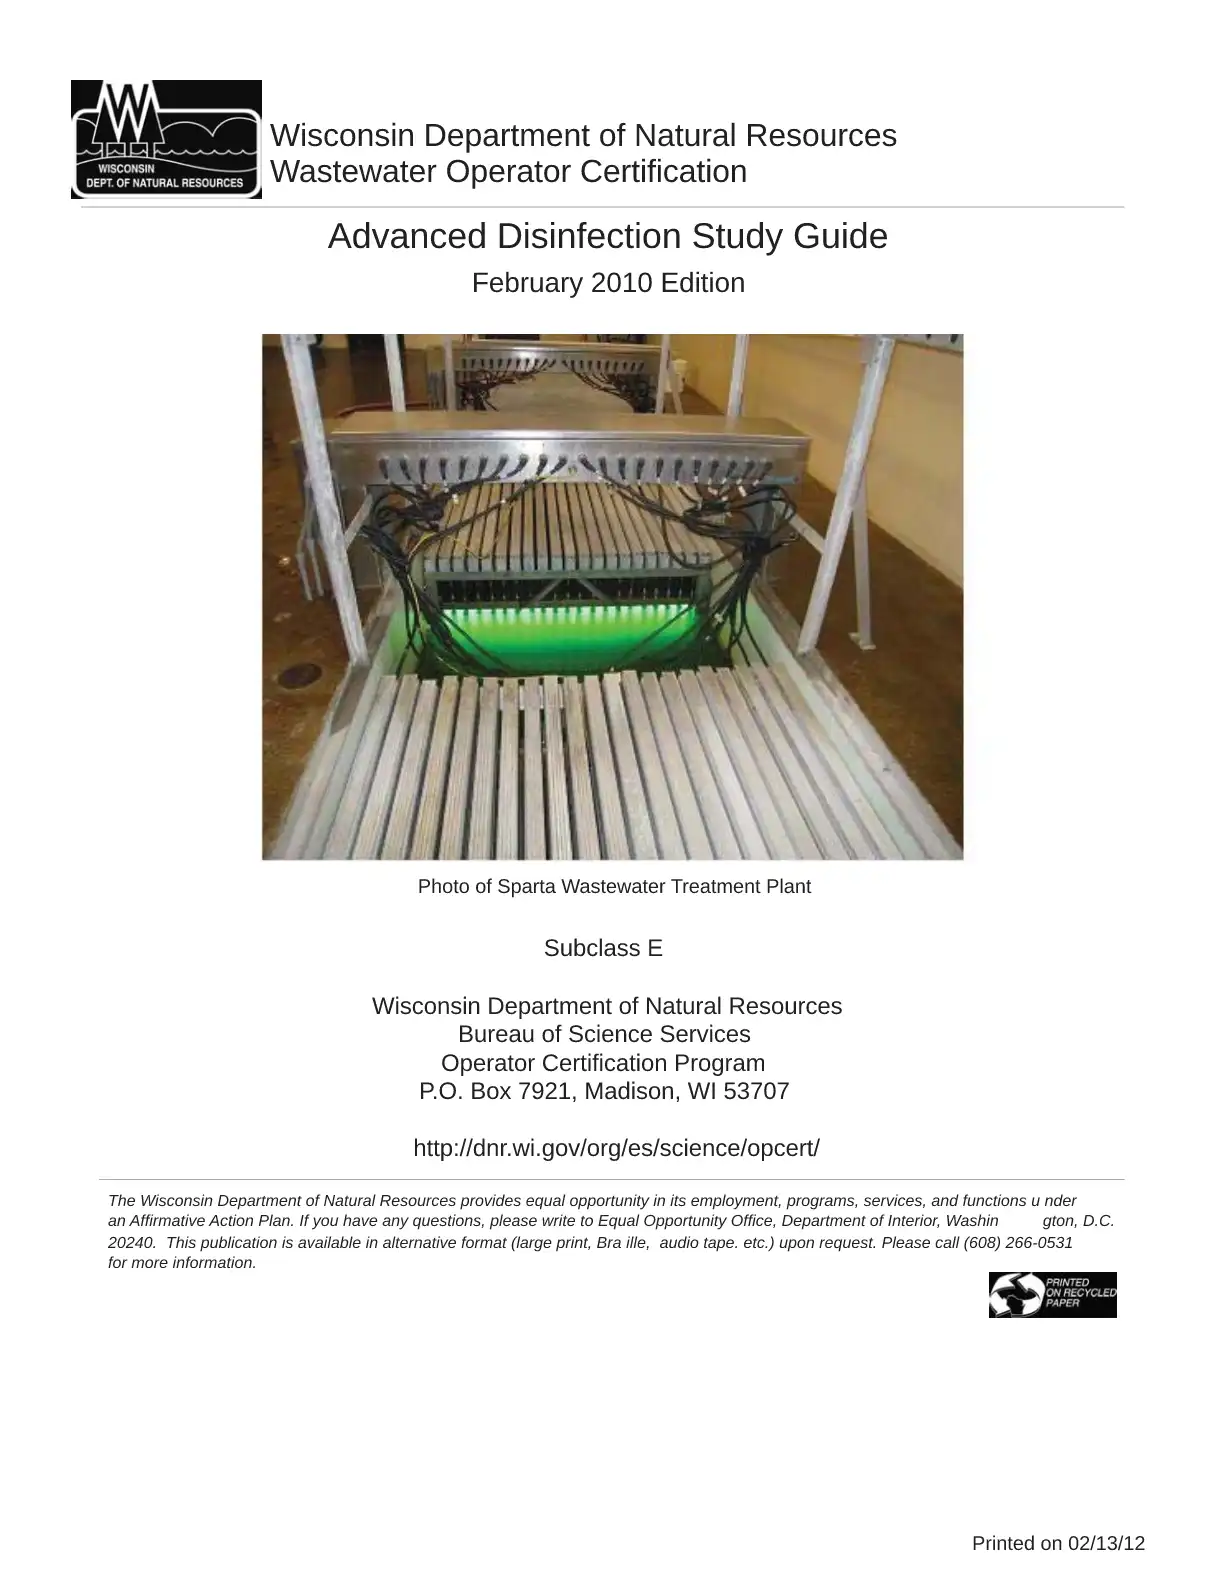 Advanced Disinfection Study Guide